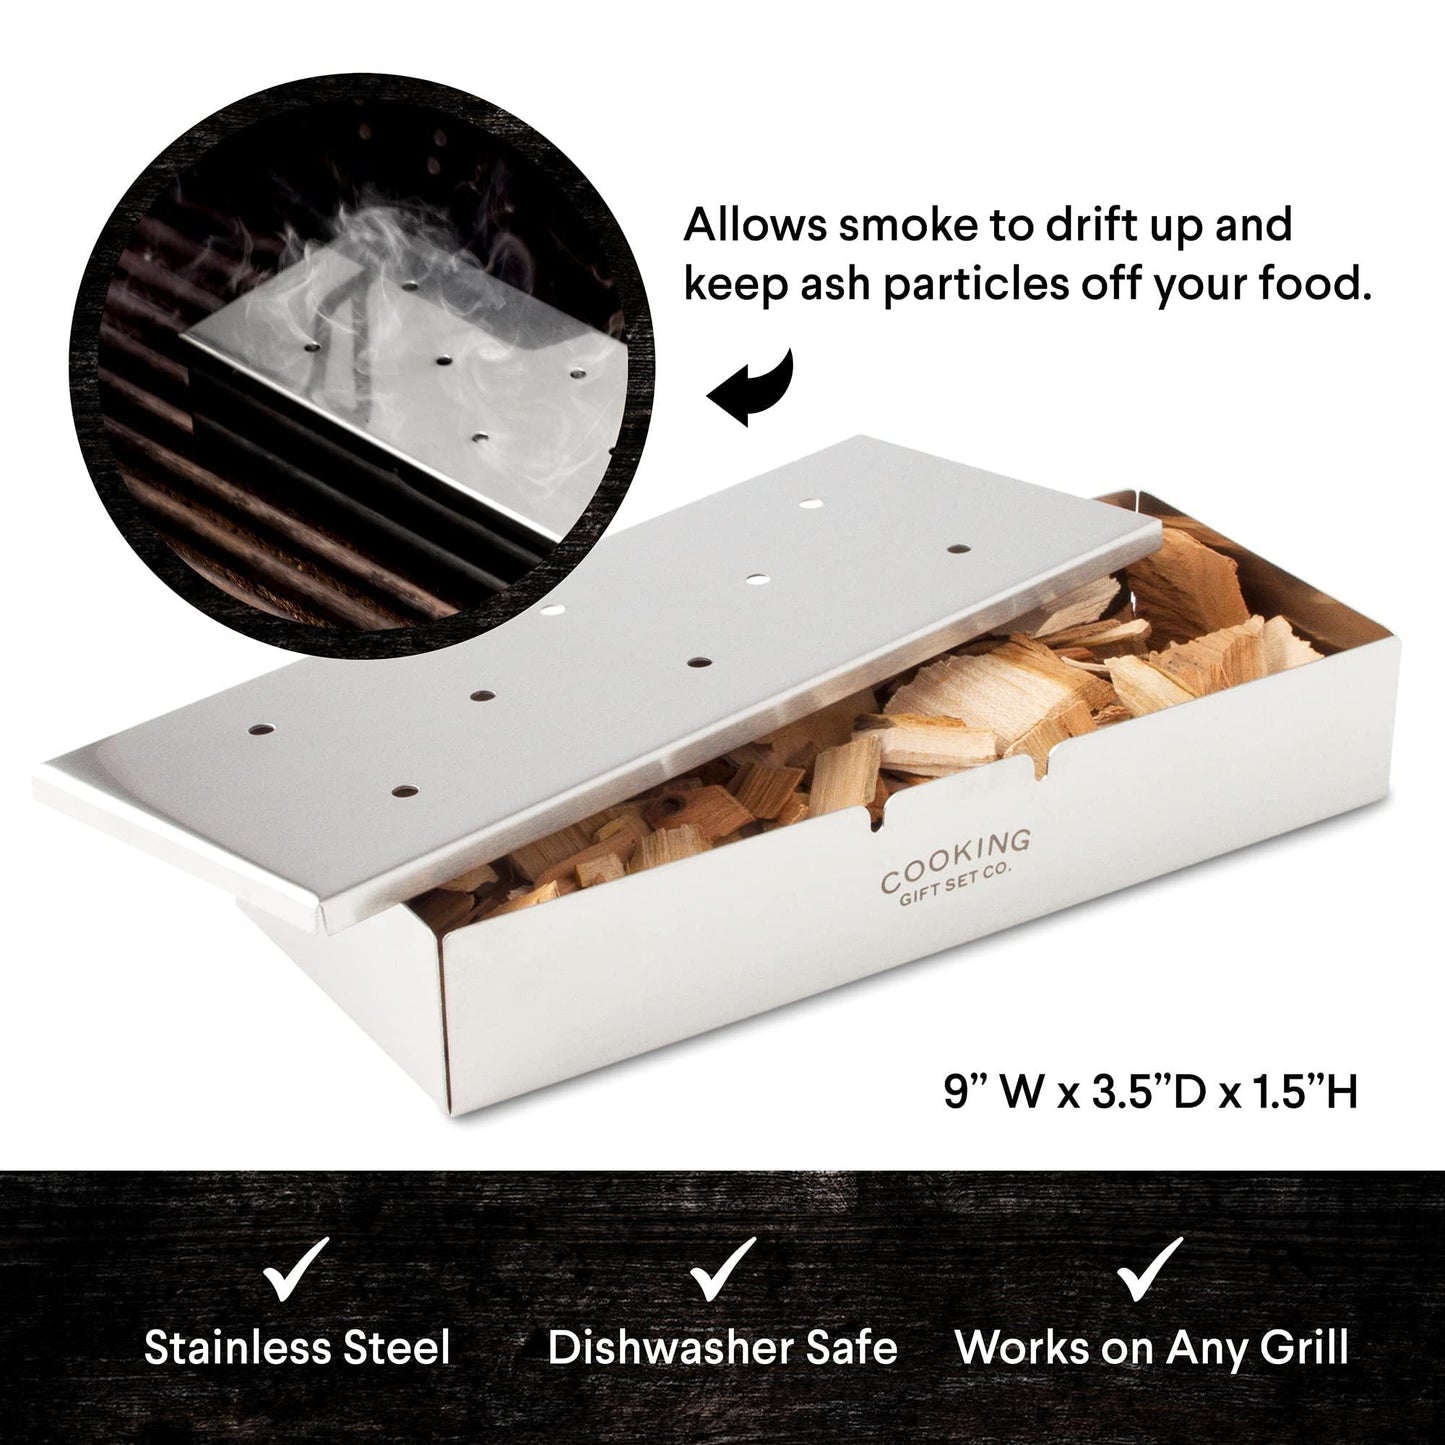 Cooking Gift Set Co. | Wood Smoked BBQ Grill Set | Birthday Gifts for Men | Gift for Men: Gift for Dad, Boyfriend Gifts, & Gifts for Husband | BBQ Accessories, Mens Gifts Ideas, Man Gifts for Cooks - CookCave